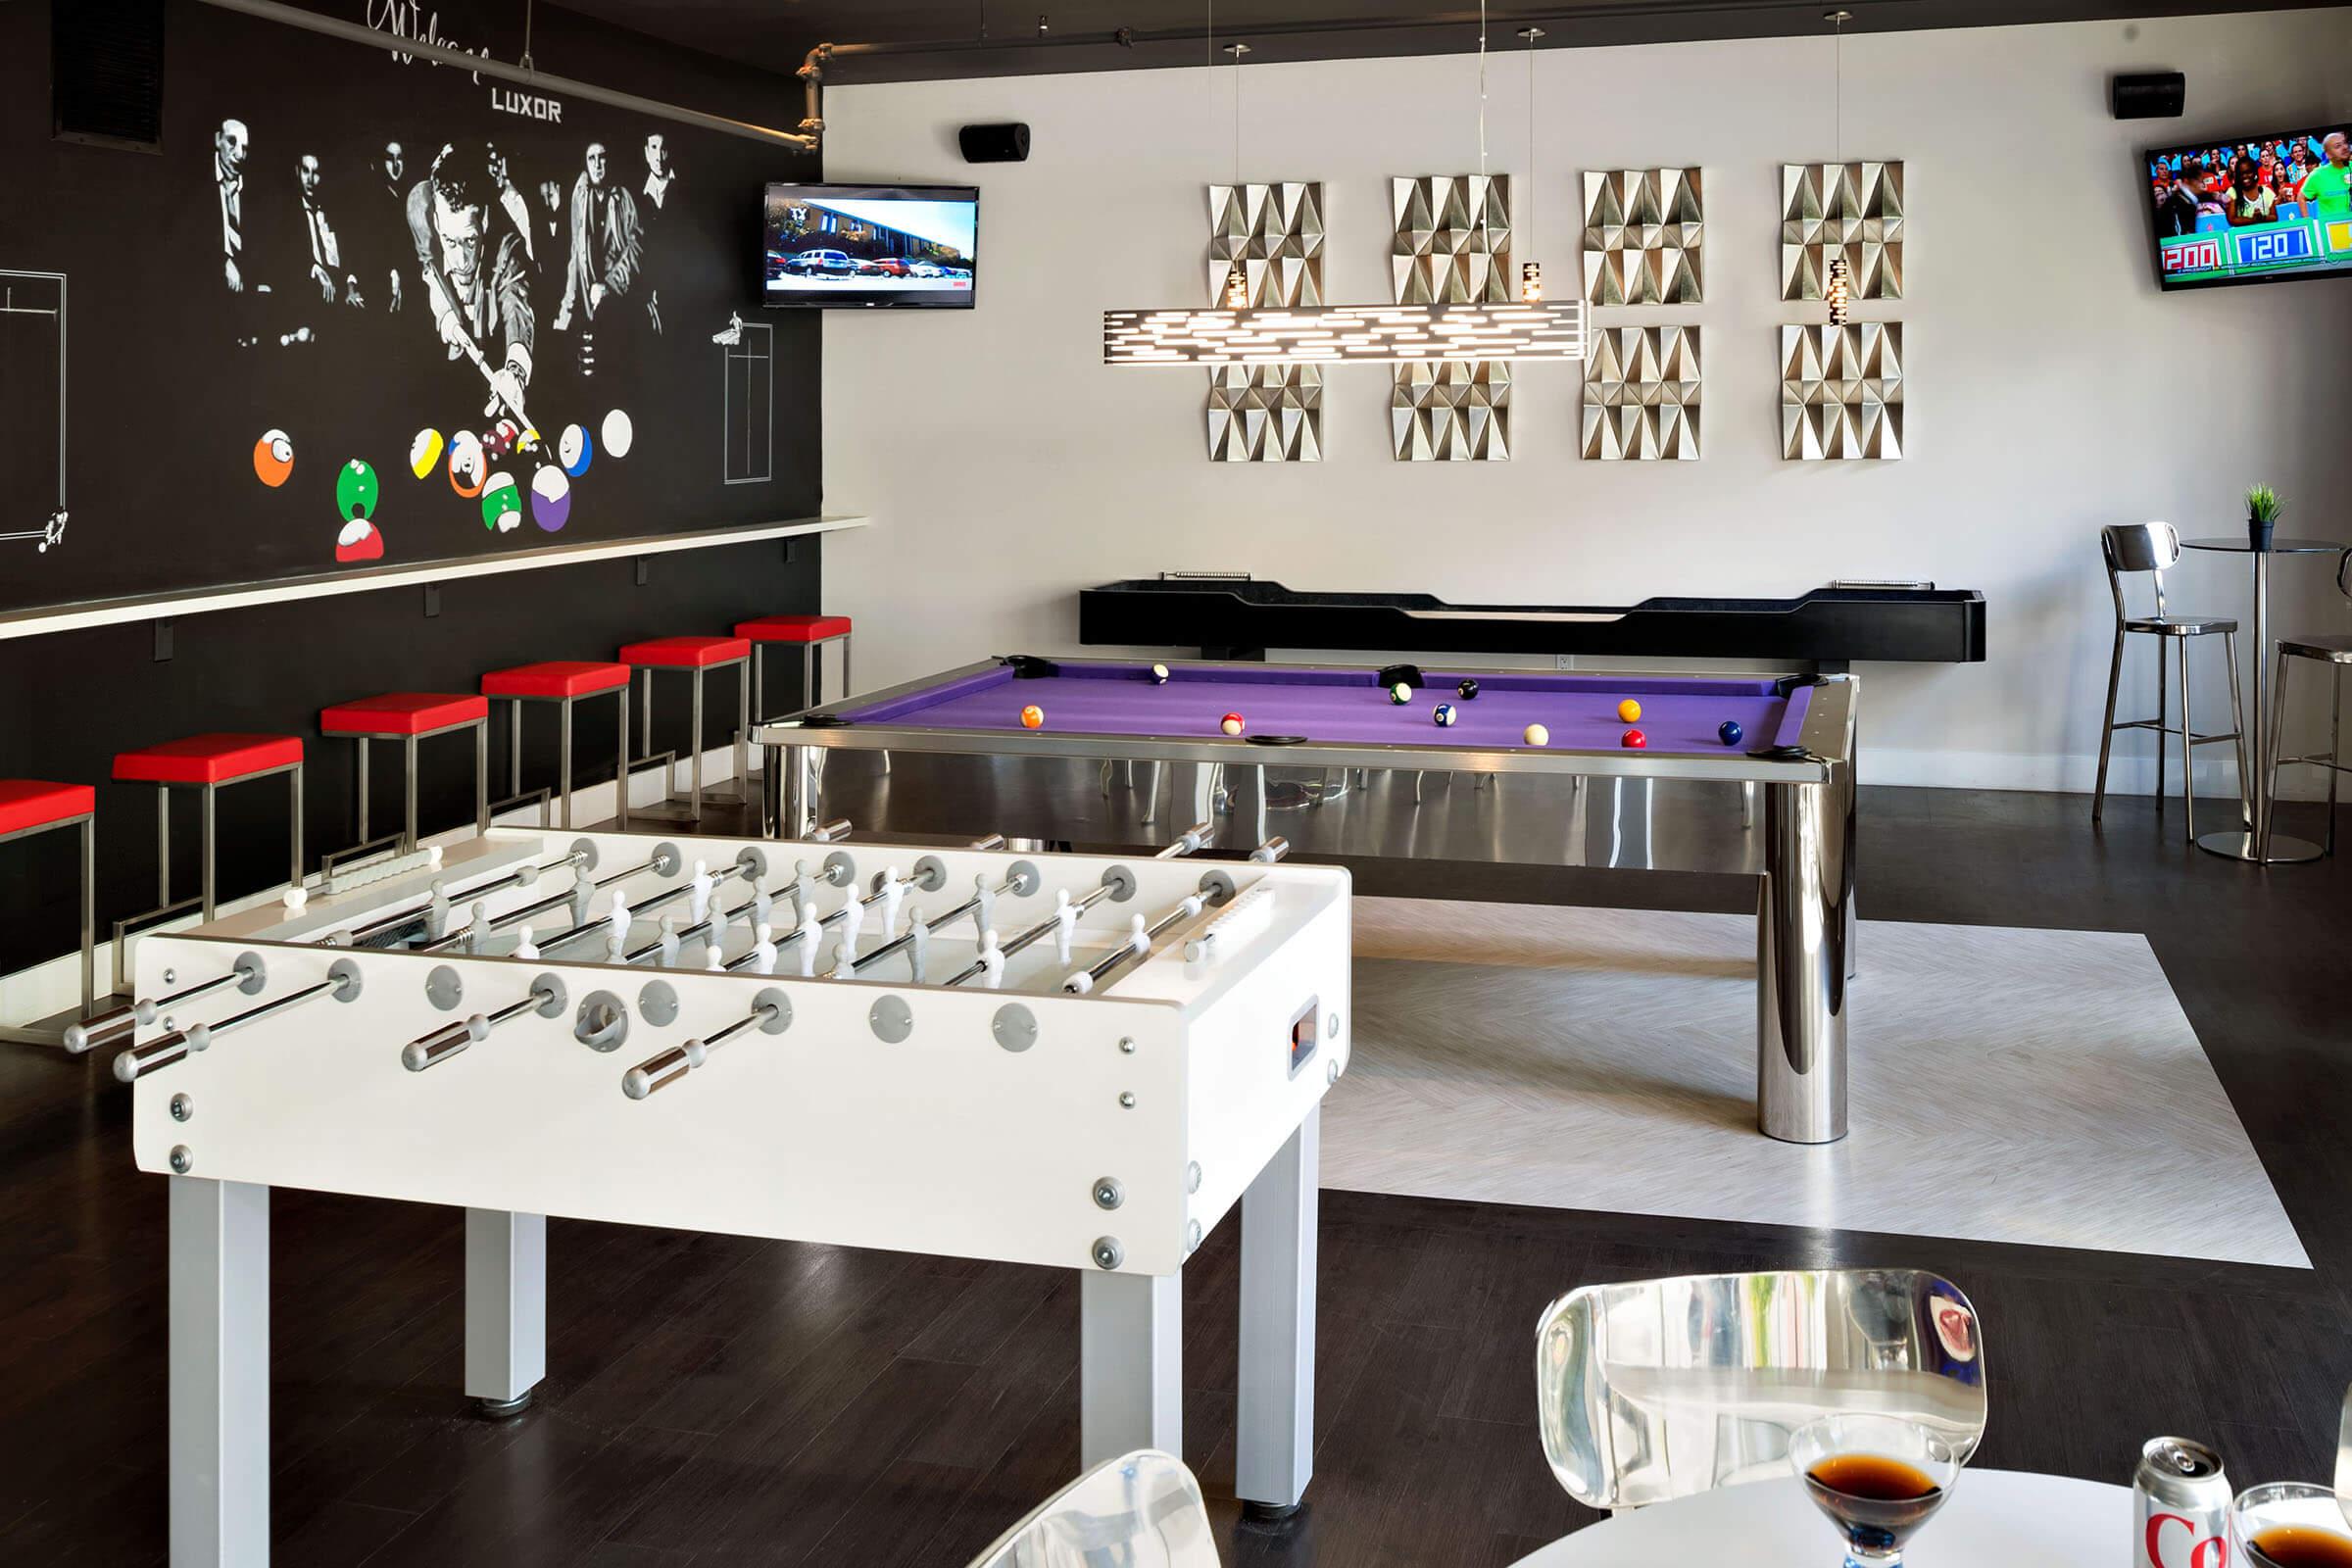 MAKE NEW MEMORIES IN OUR GAME ROOM!